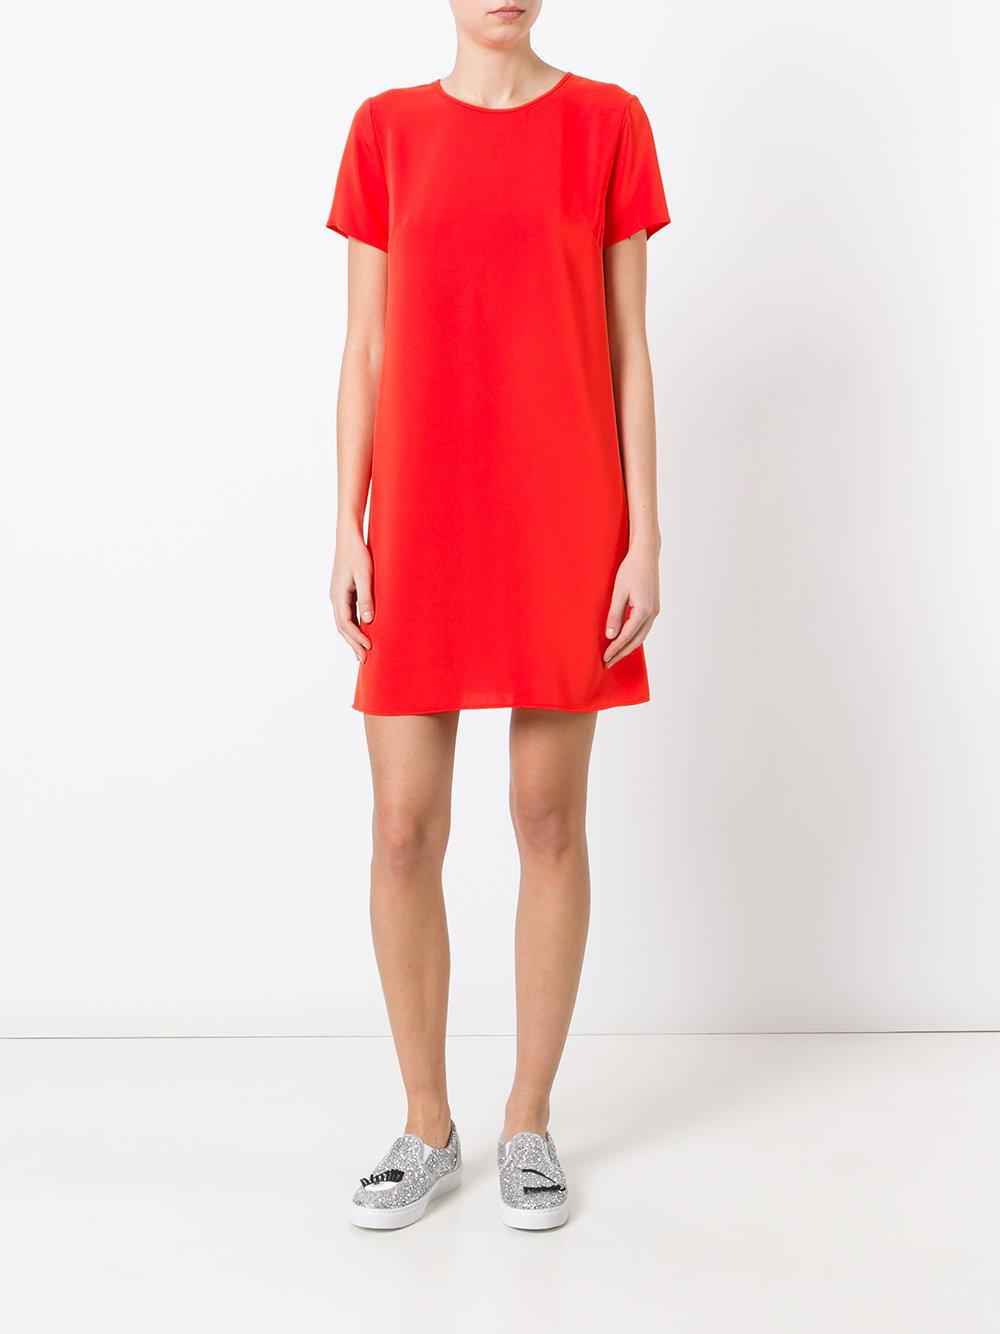 P.A.R.O.S.H. Synthetic Plain T-shirt Dress in Red - Lyst